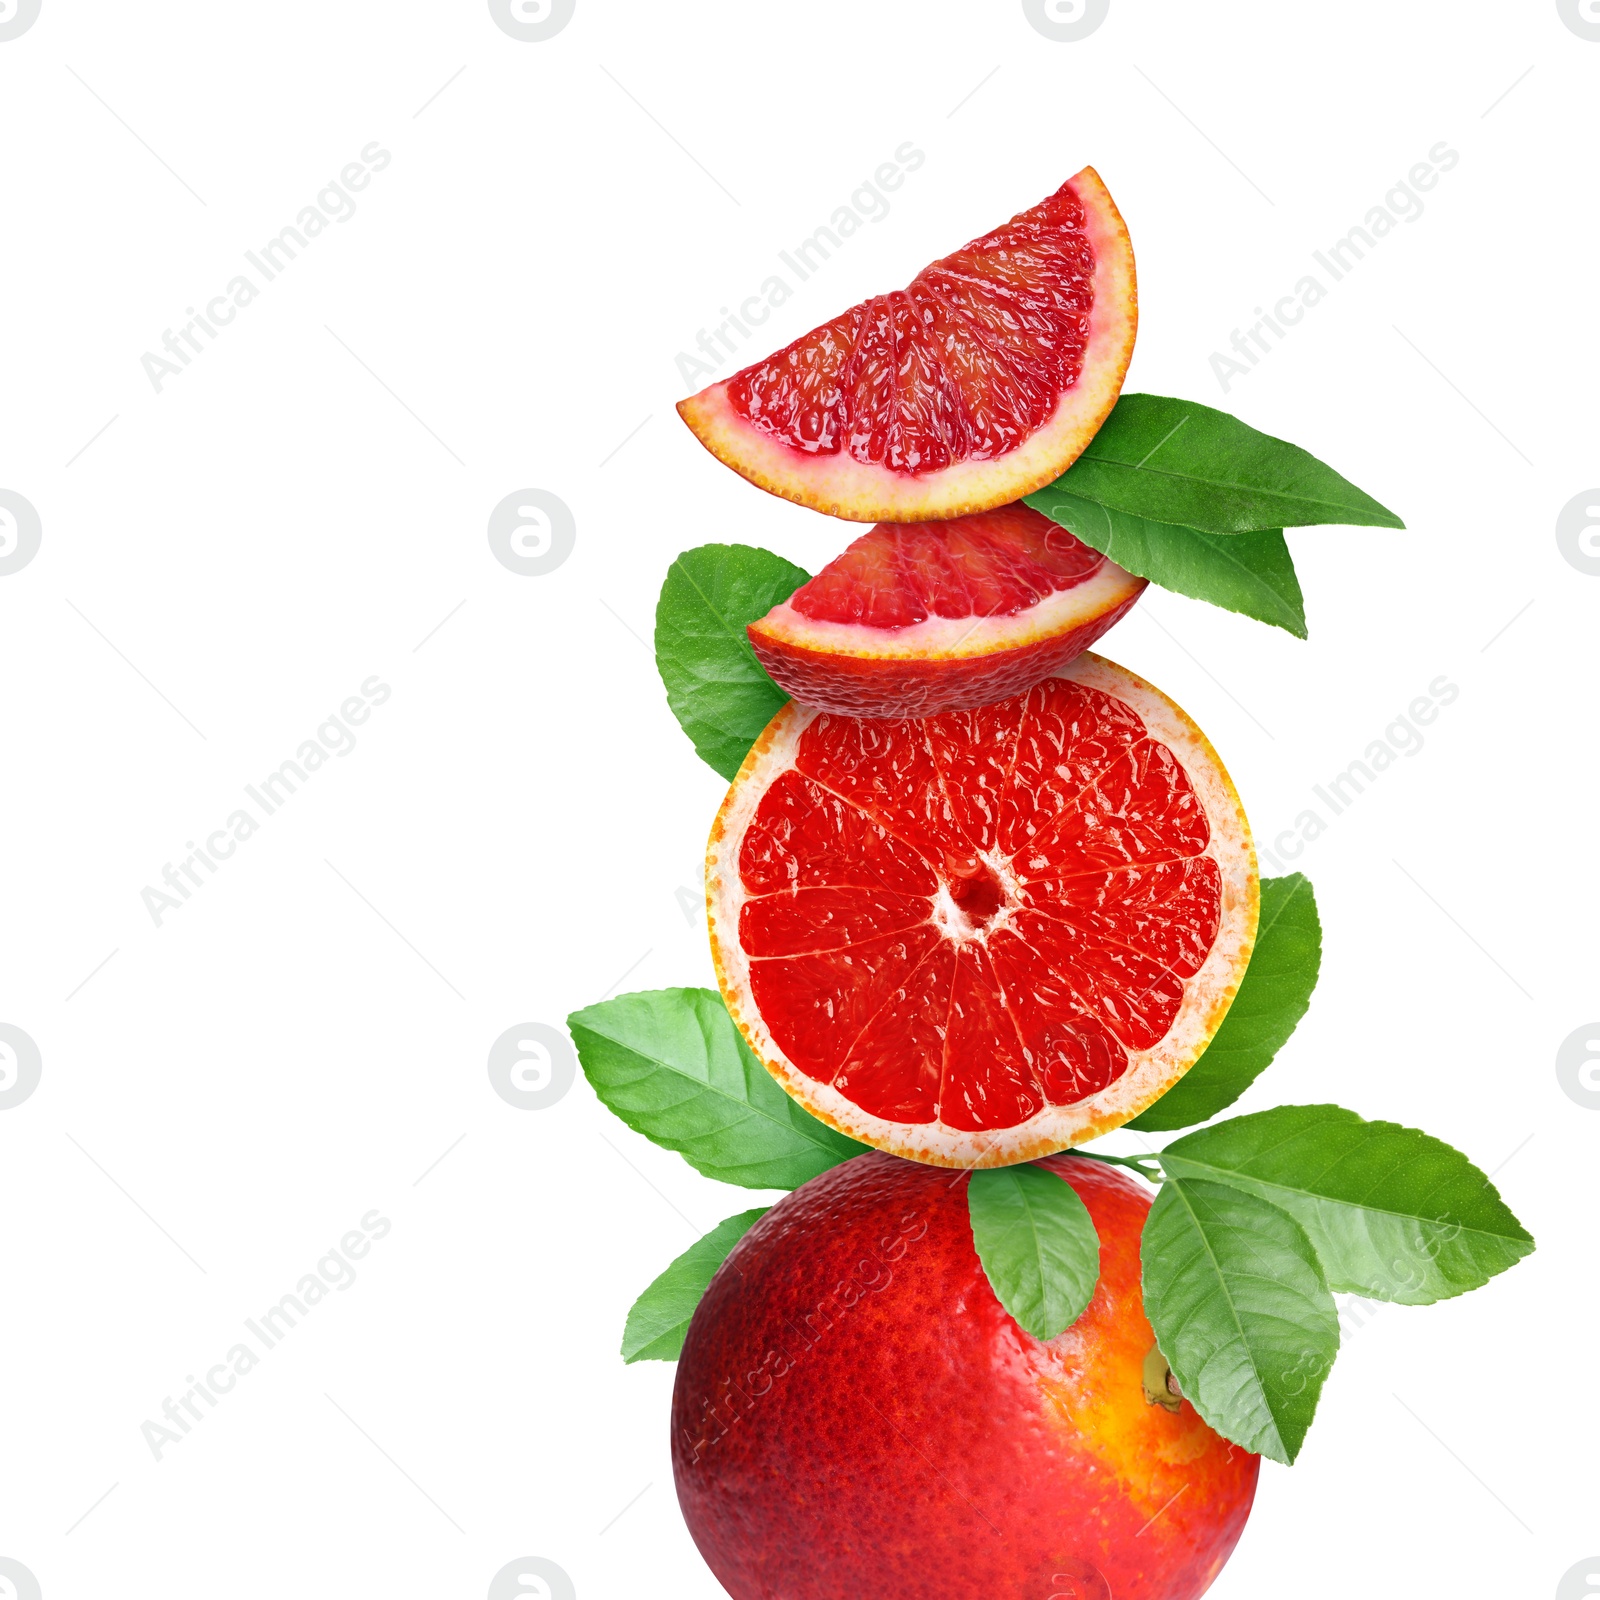 Image of Stacked cut and whole red oranges with green leaves on white background